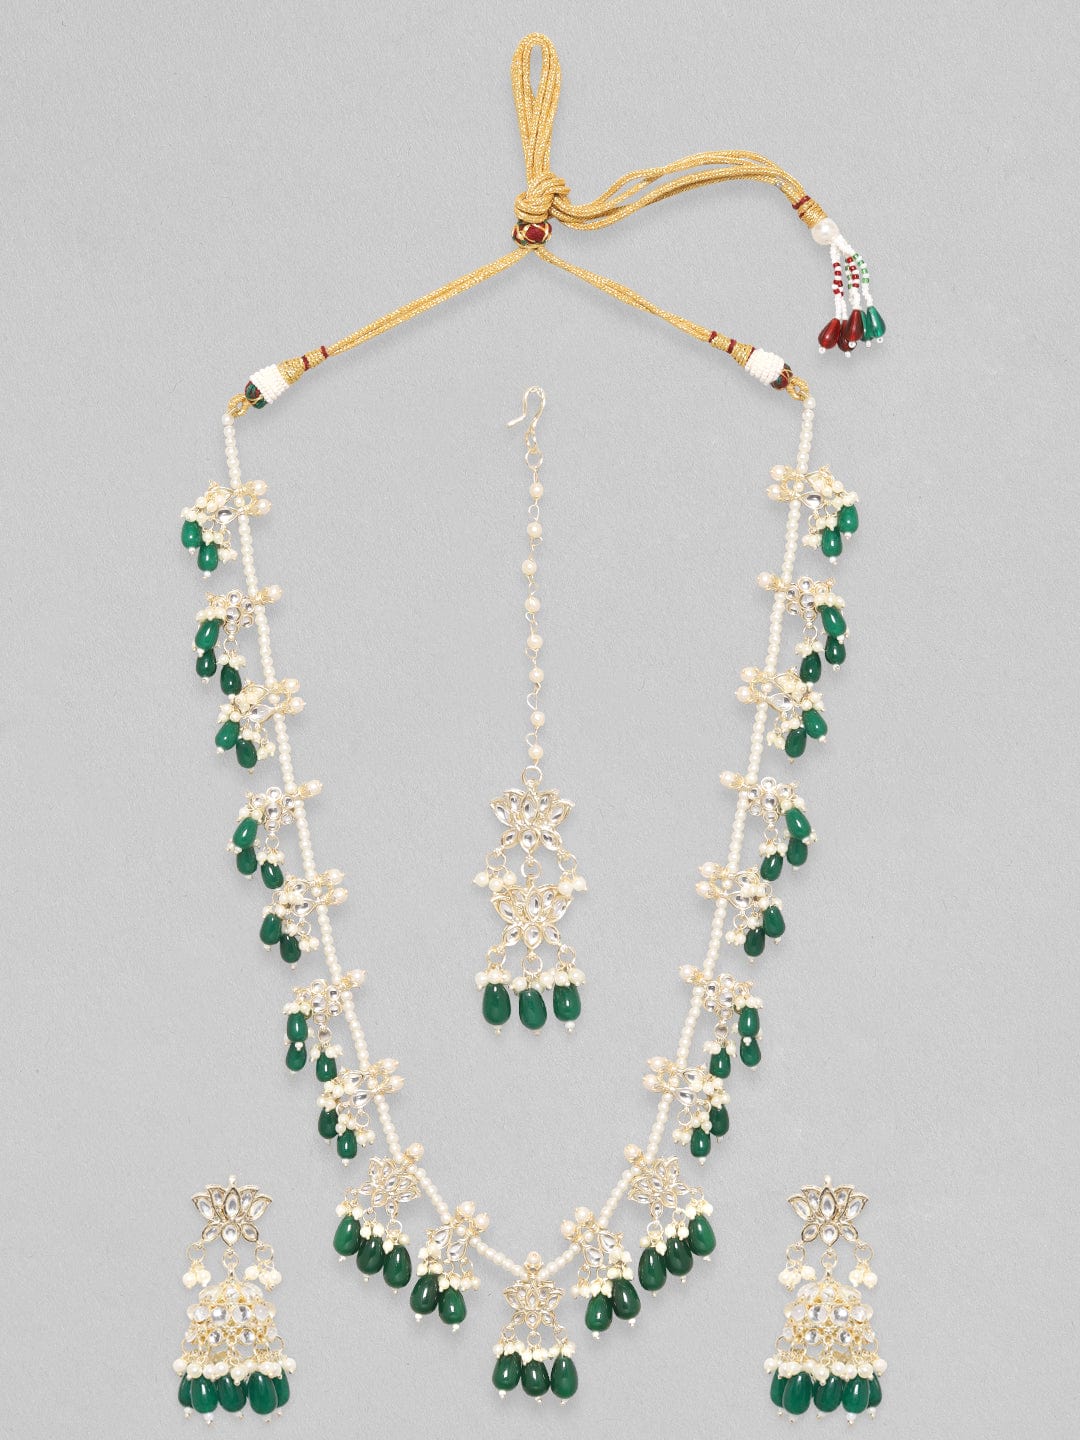 Rubans 22k Gold Plated With Kundan Stones & Green Beads Jhumkas Earrings. Necklace Set